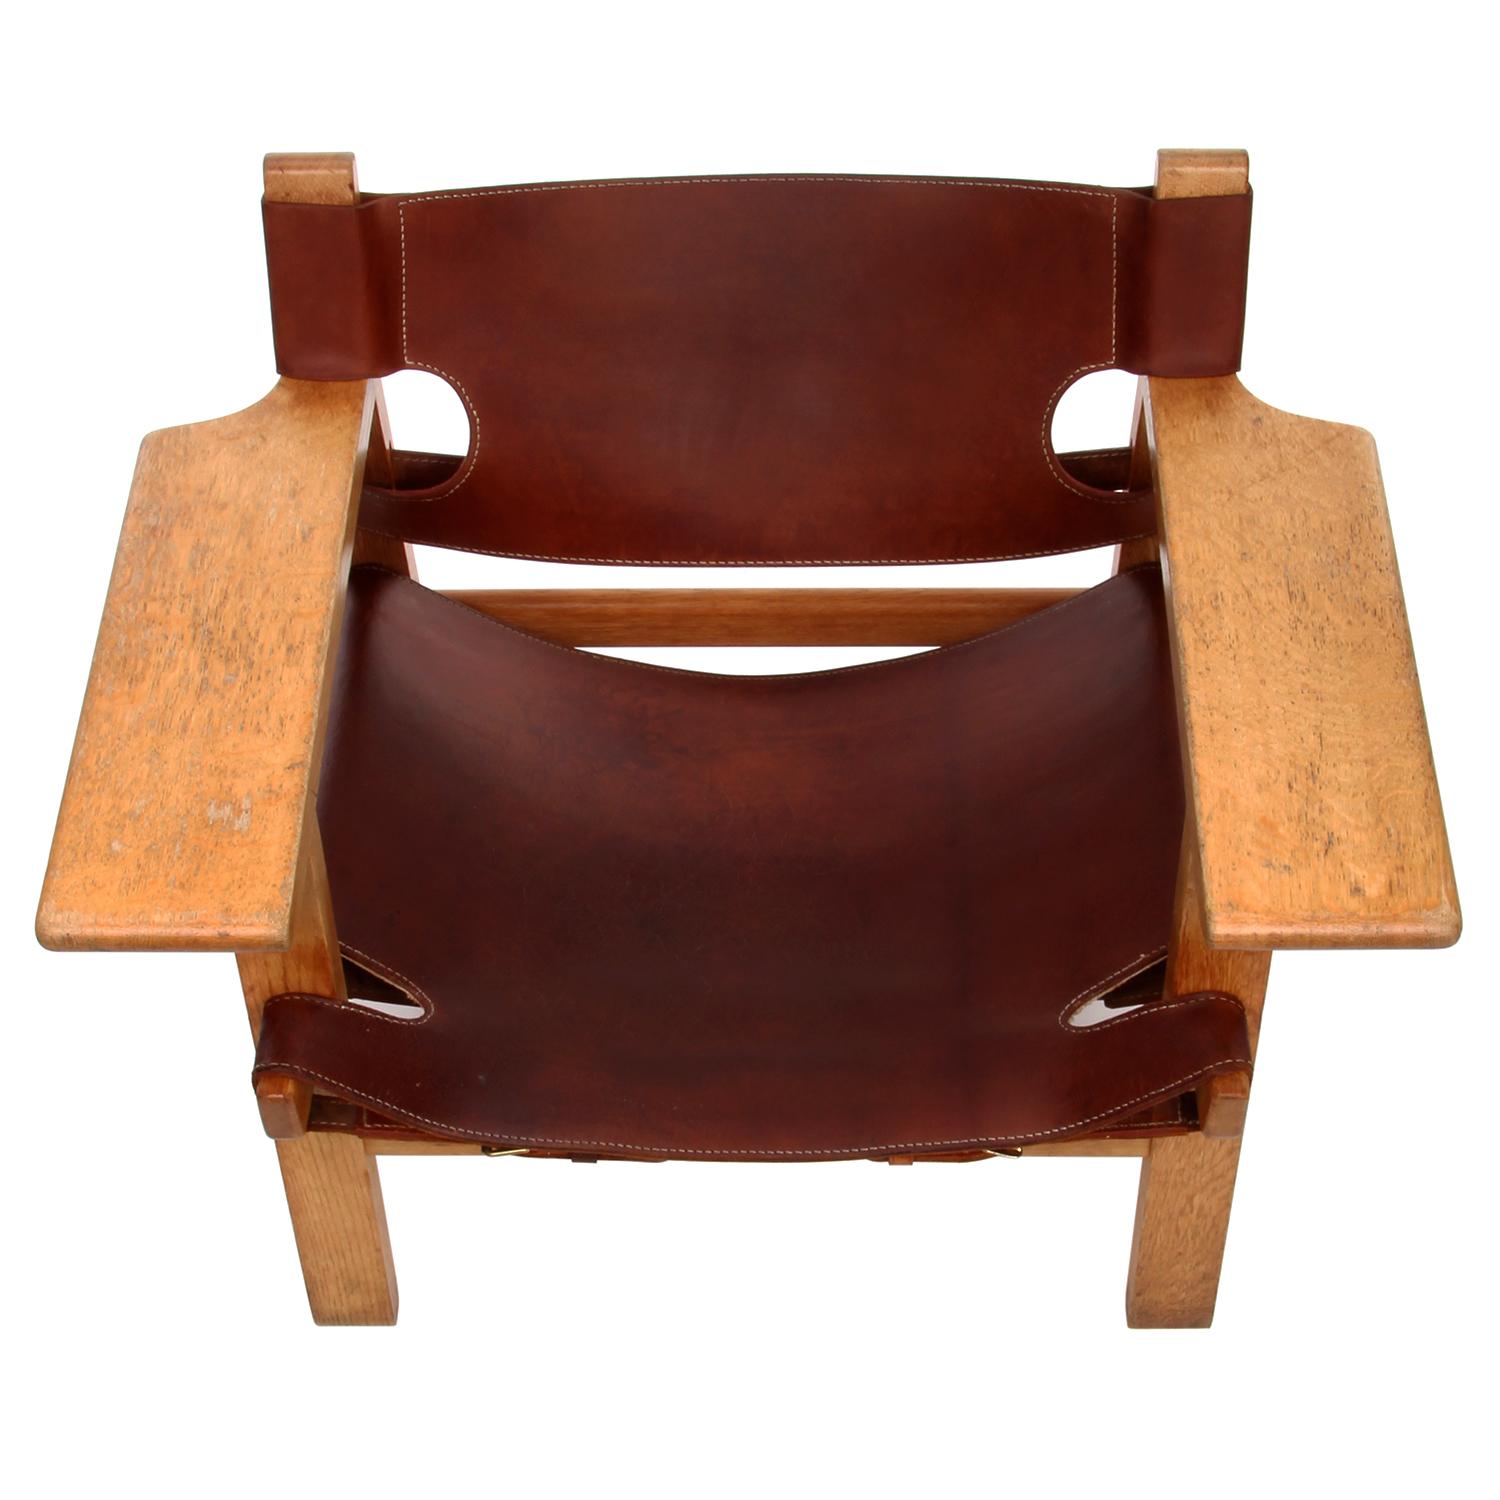 Oiled Spanish Chair by Borge Mogensen, Fredericia Furniture, 1958, Vintage Edition